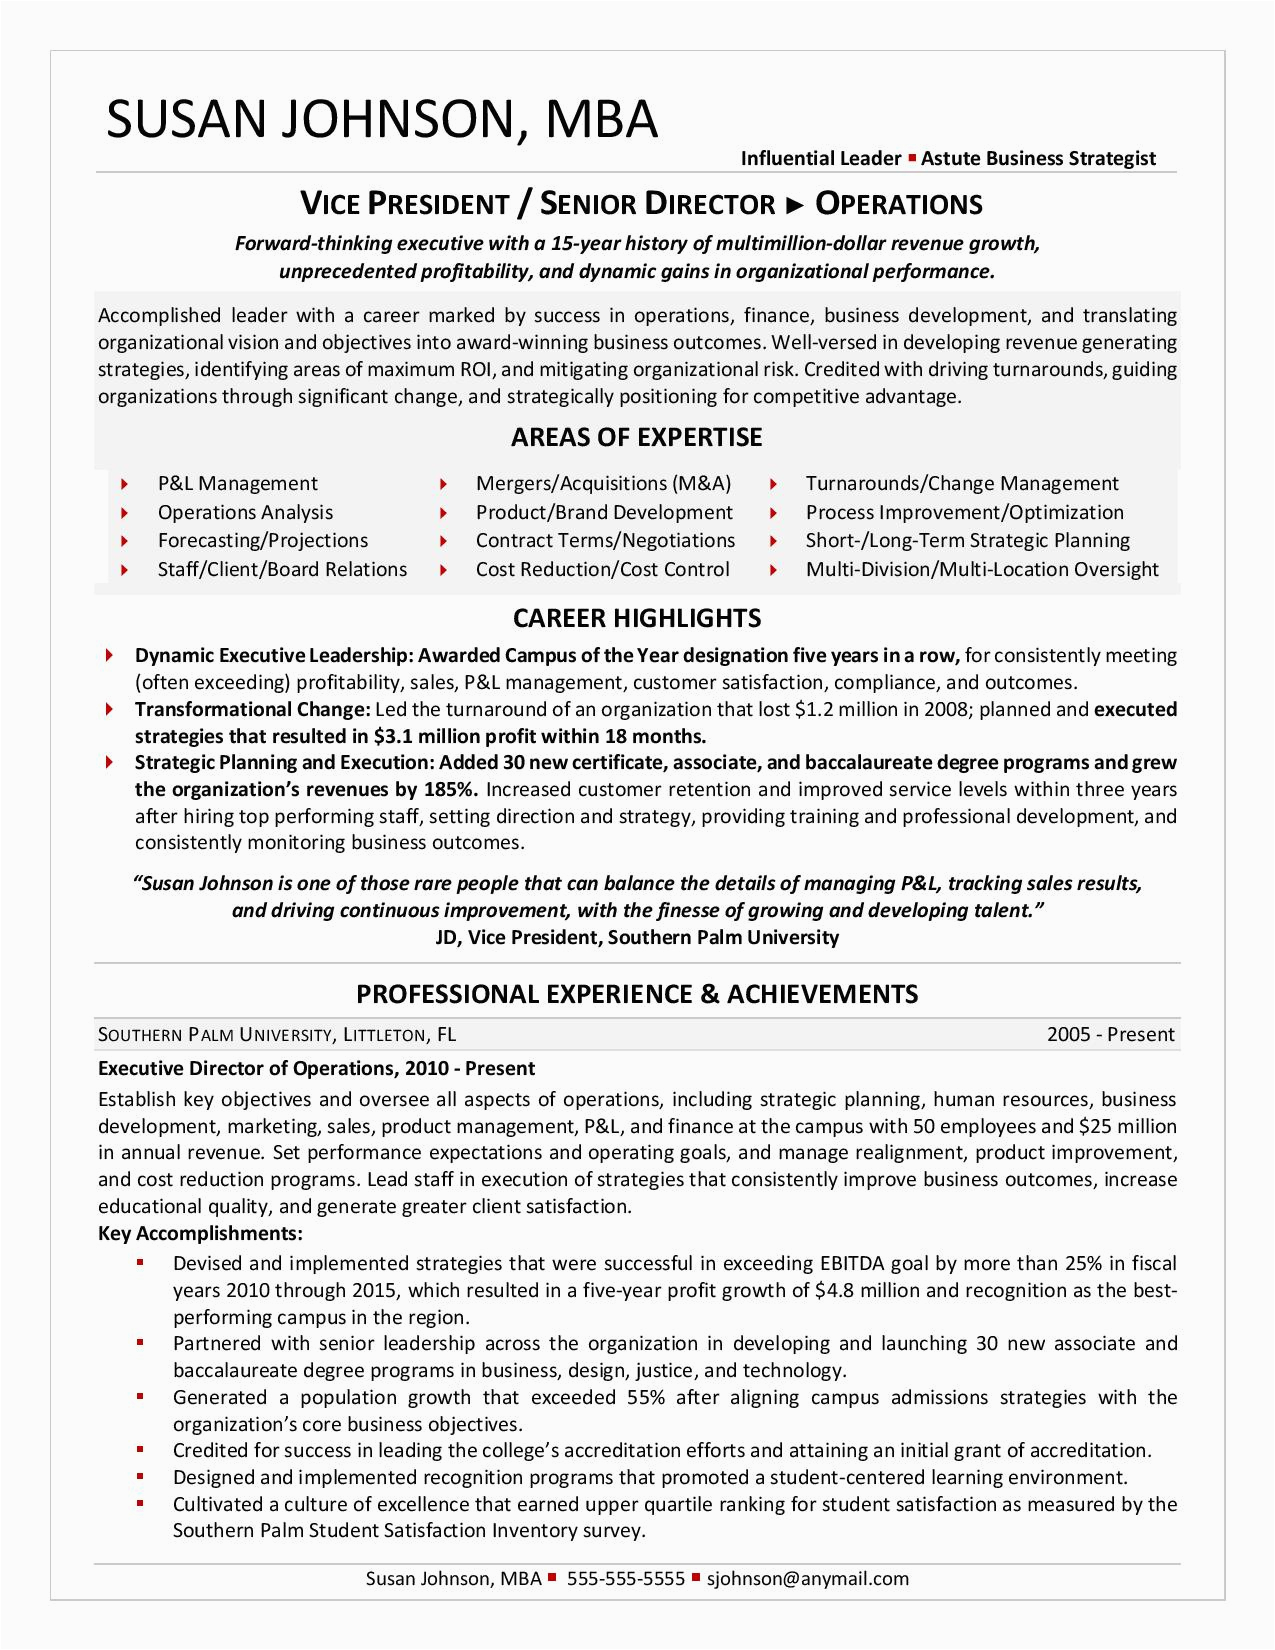 Sample Resume for Midl Level Manager Samples Executive Resume Services